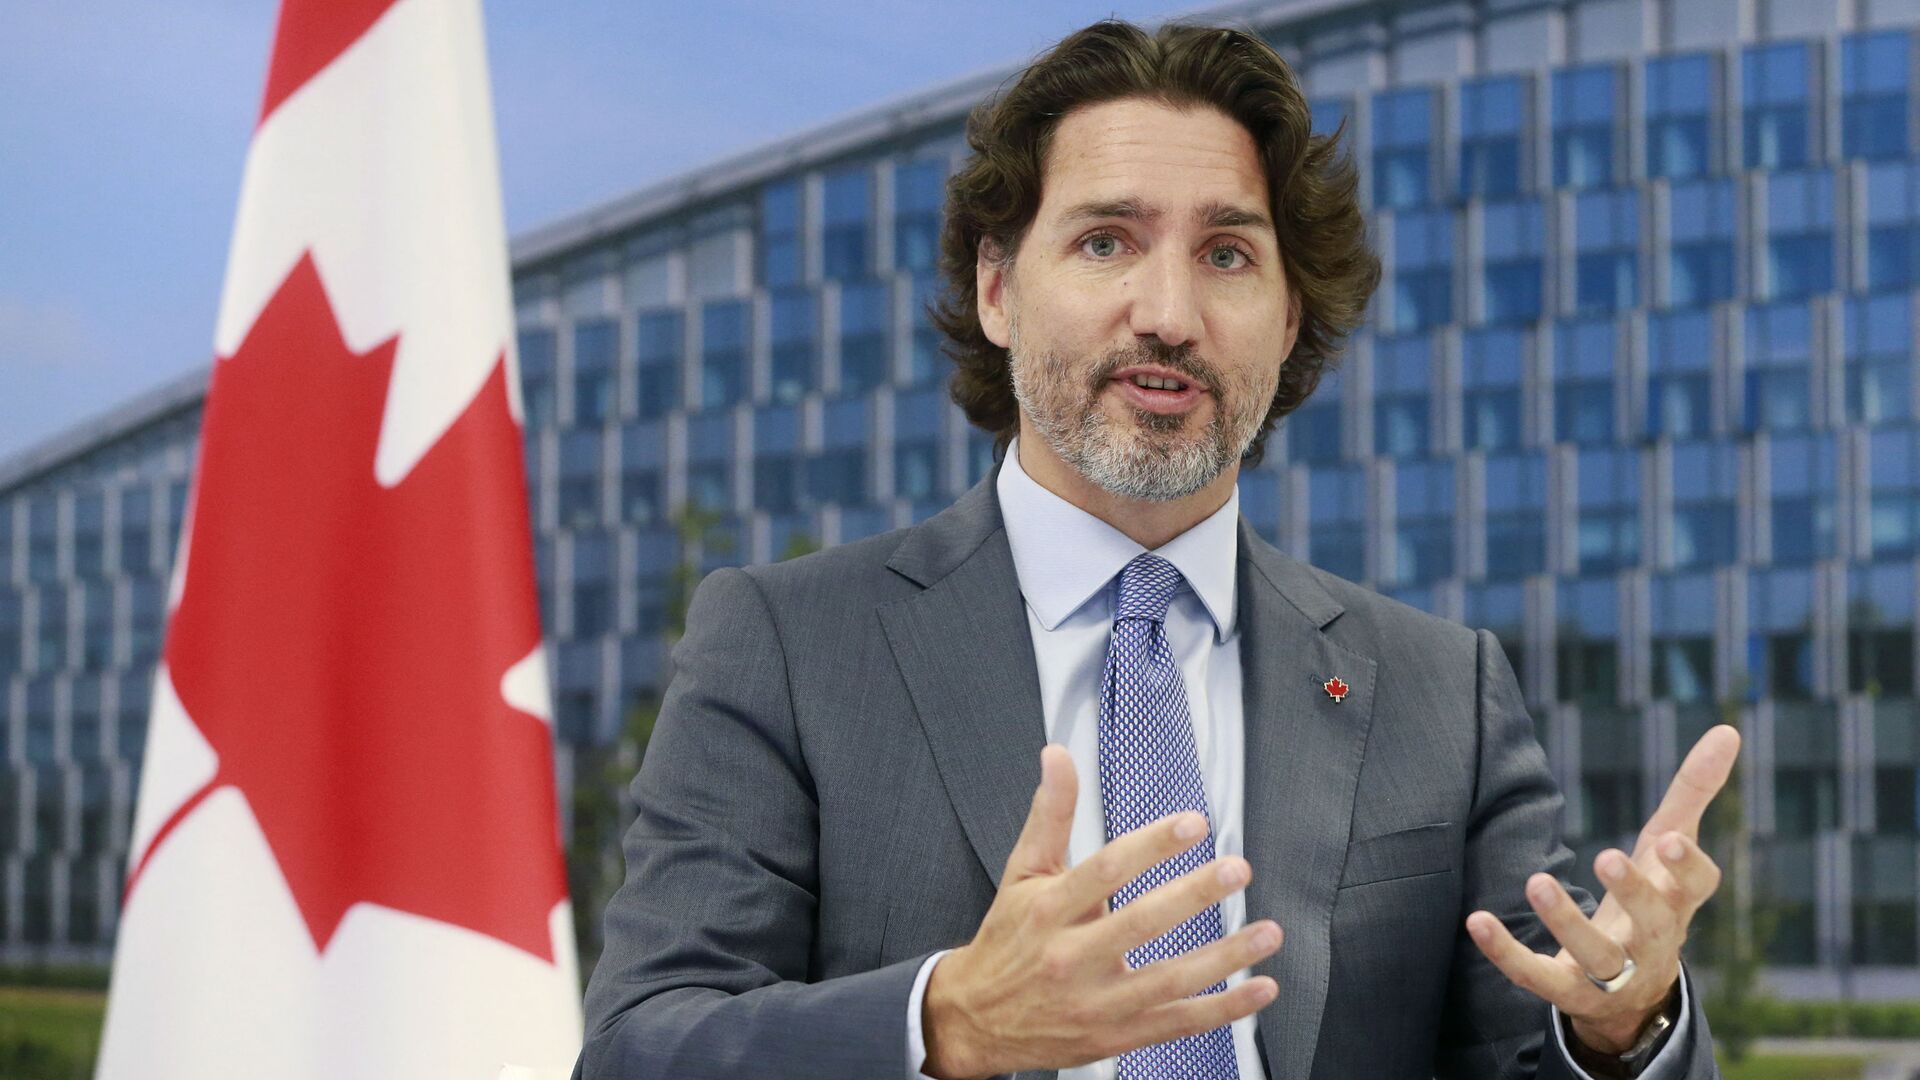 Canada's Prime Minister Justin Trudeau  speaks to the NATO Secretary General during a NATO summit at the North Atlantic Treaty Organization (NATO) headquarters in Brussels on June 14, 2021.  - Sputnik International, 1920, 02.09.2021